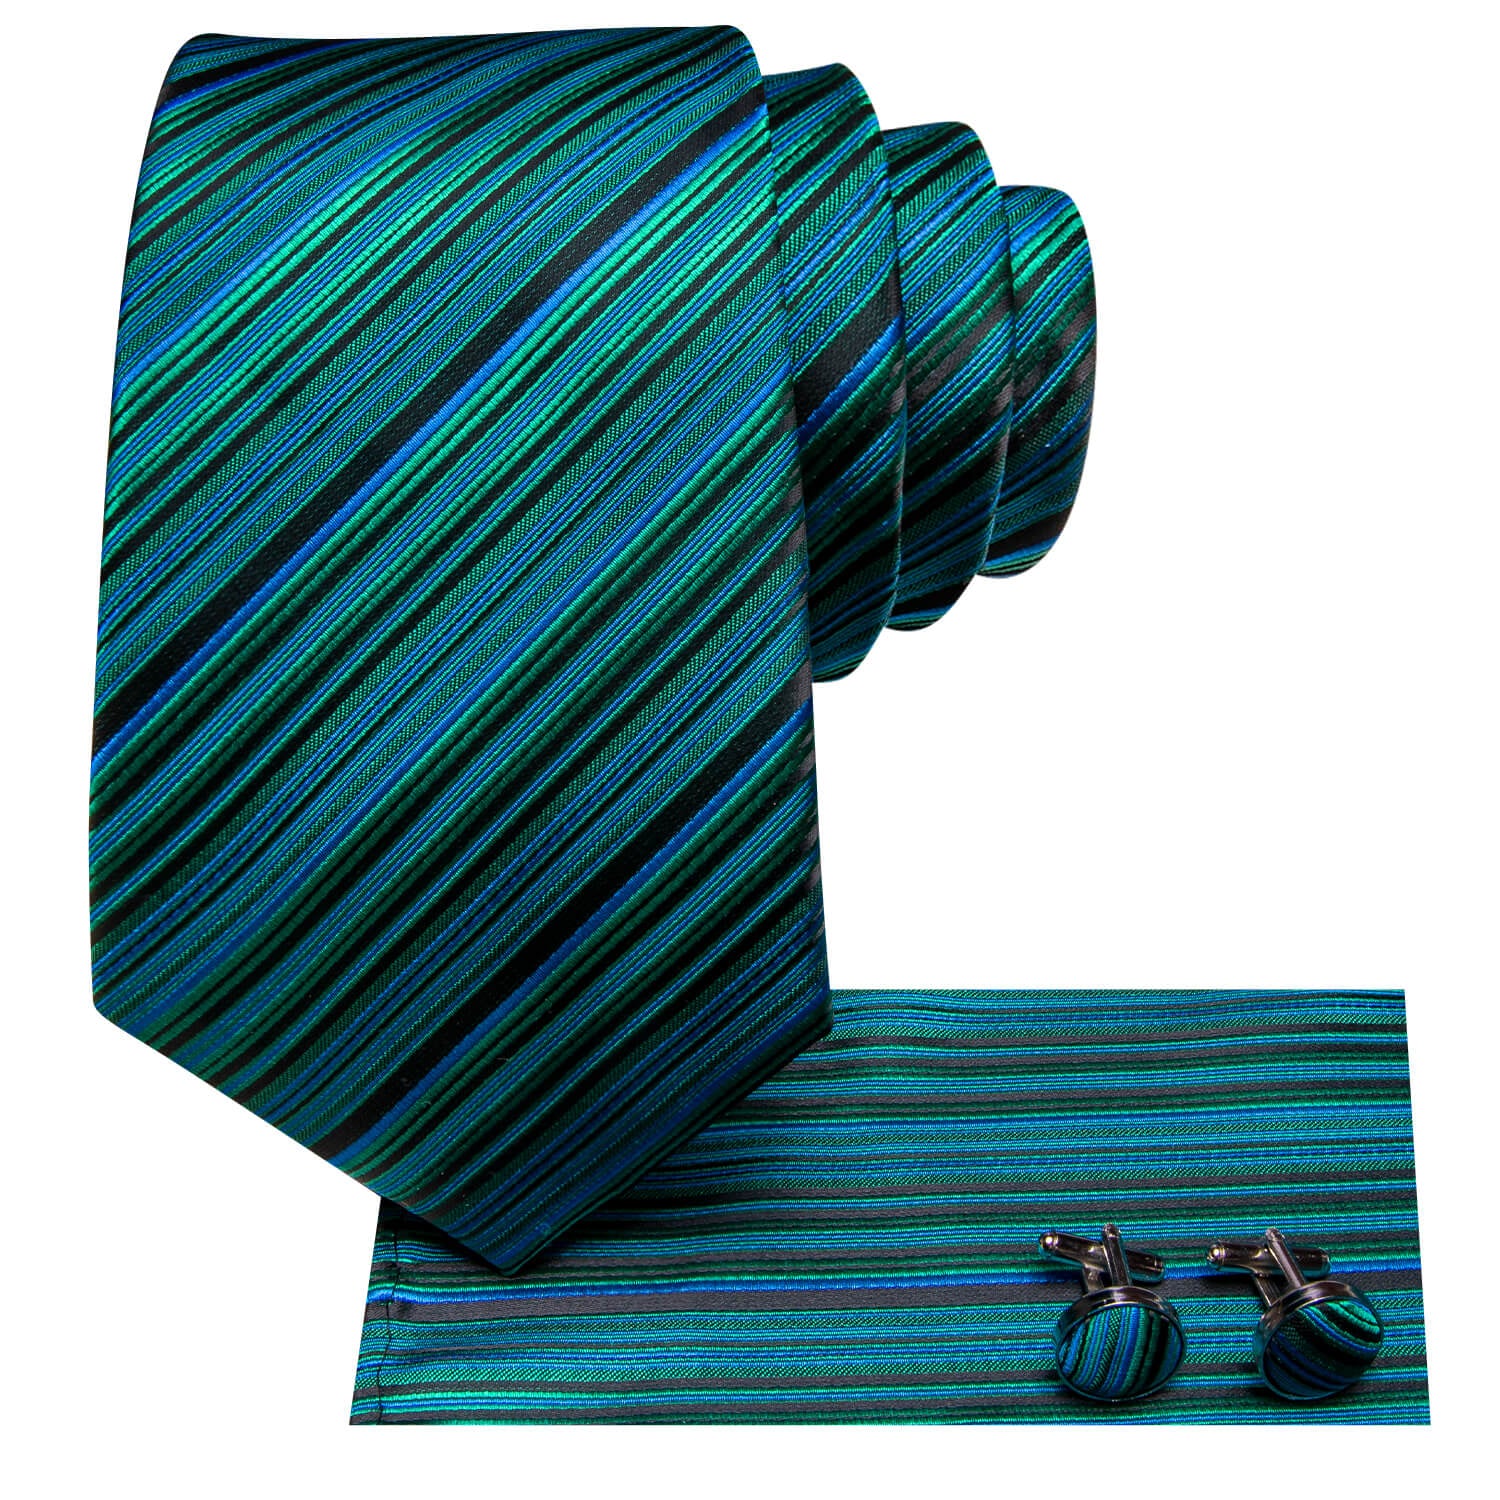 Hi-Tie Striped Teal Tie with Pocket Square and Cufflinks